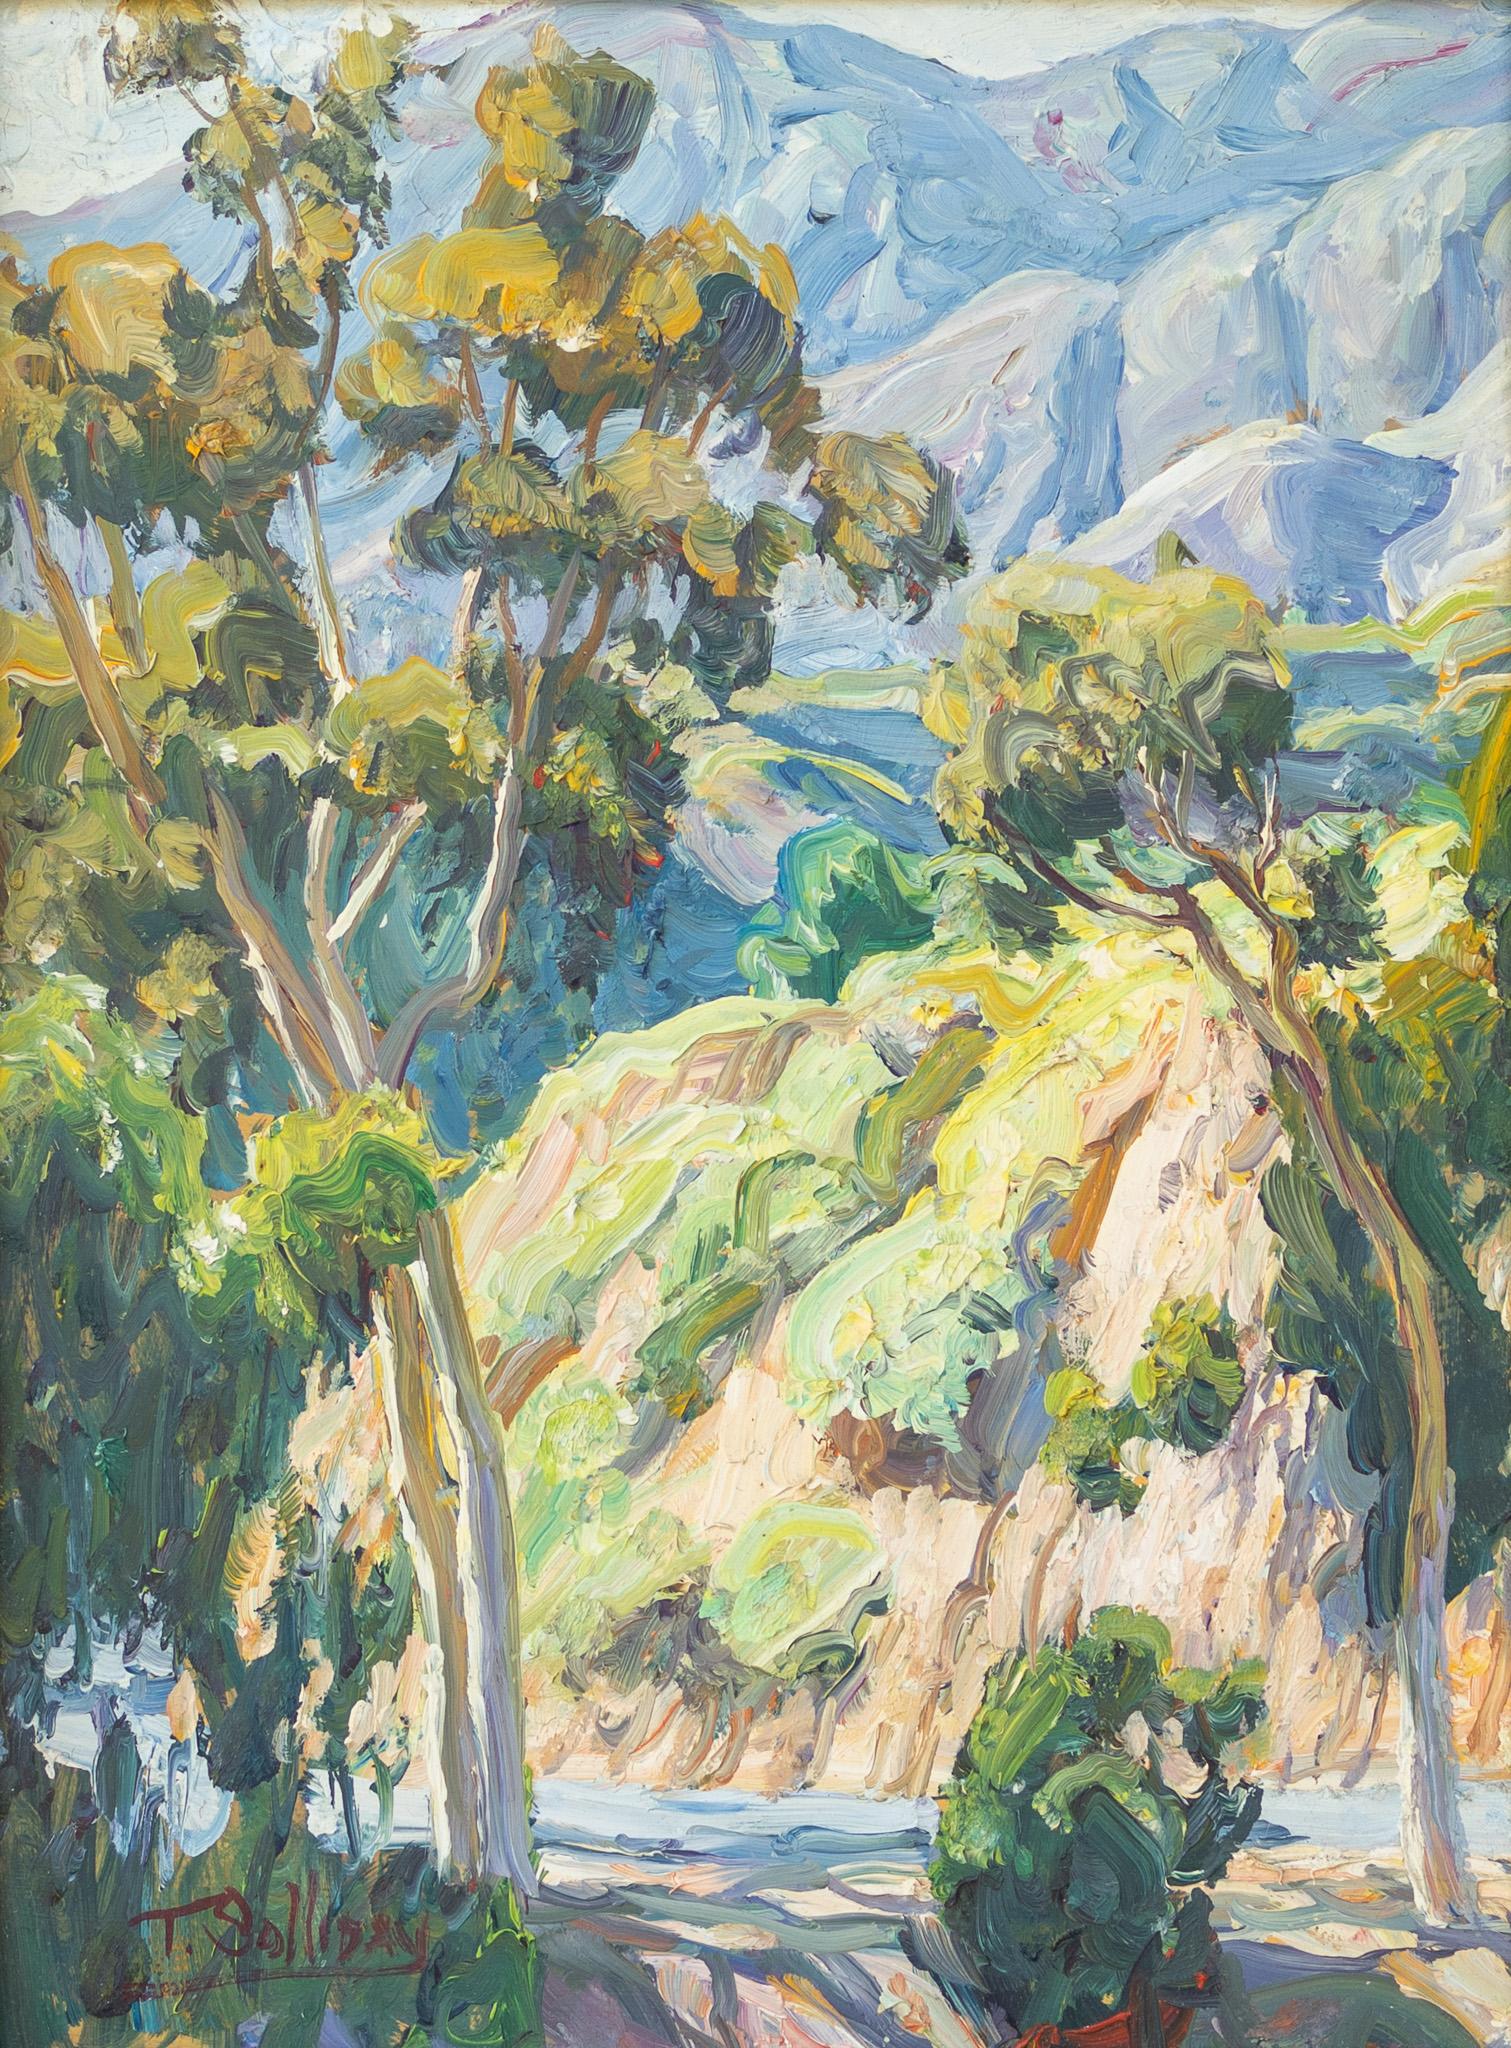 Tim Solliday Landscape Painting - "California" Hilly Landscape Scene with Eucalyptus Trees